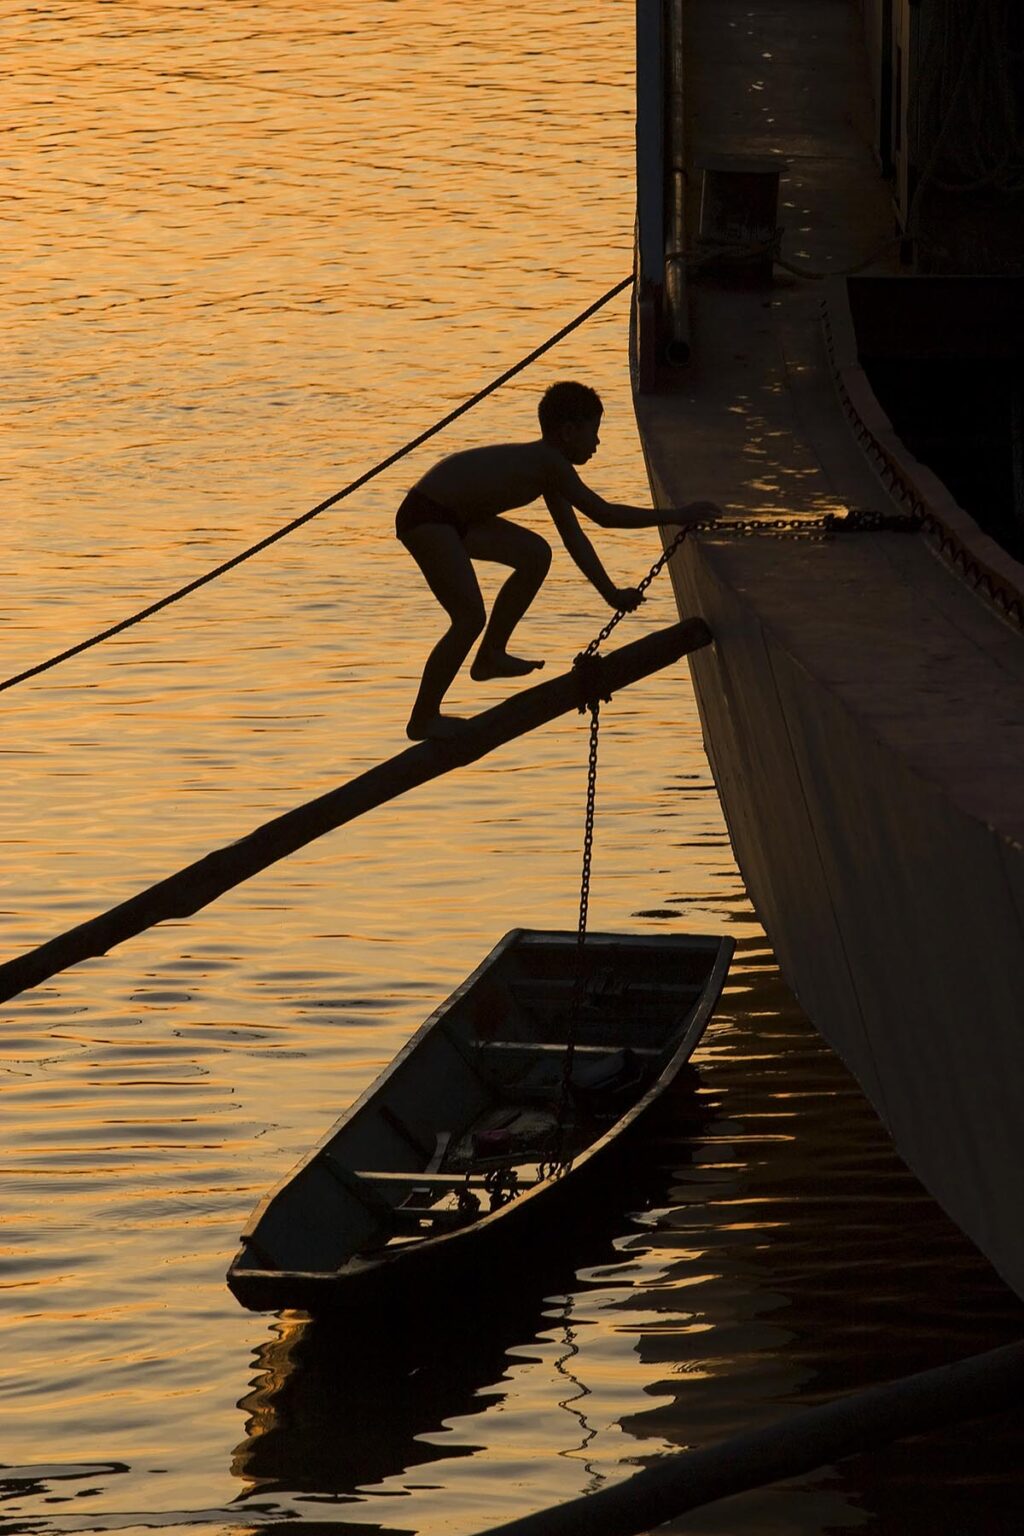 Young boy walks up a plank to a boat on the Mekong River at dusk - LUANG PROBANG, LAOS